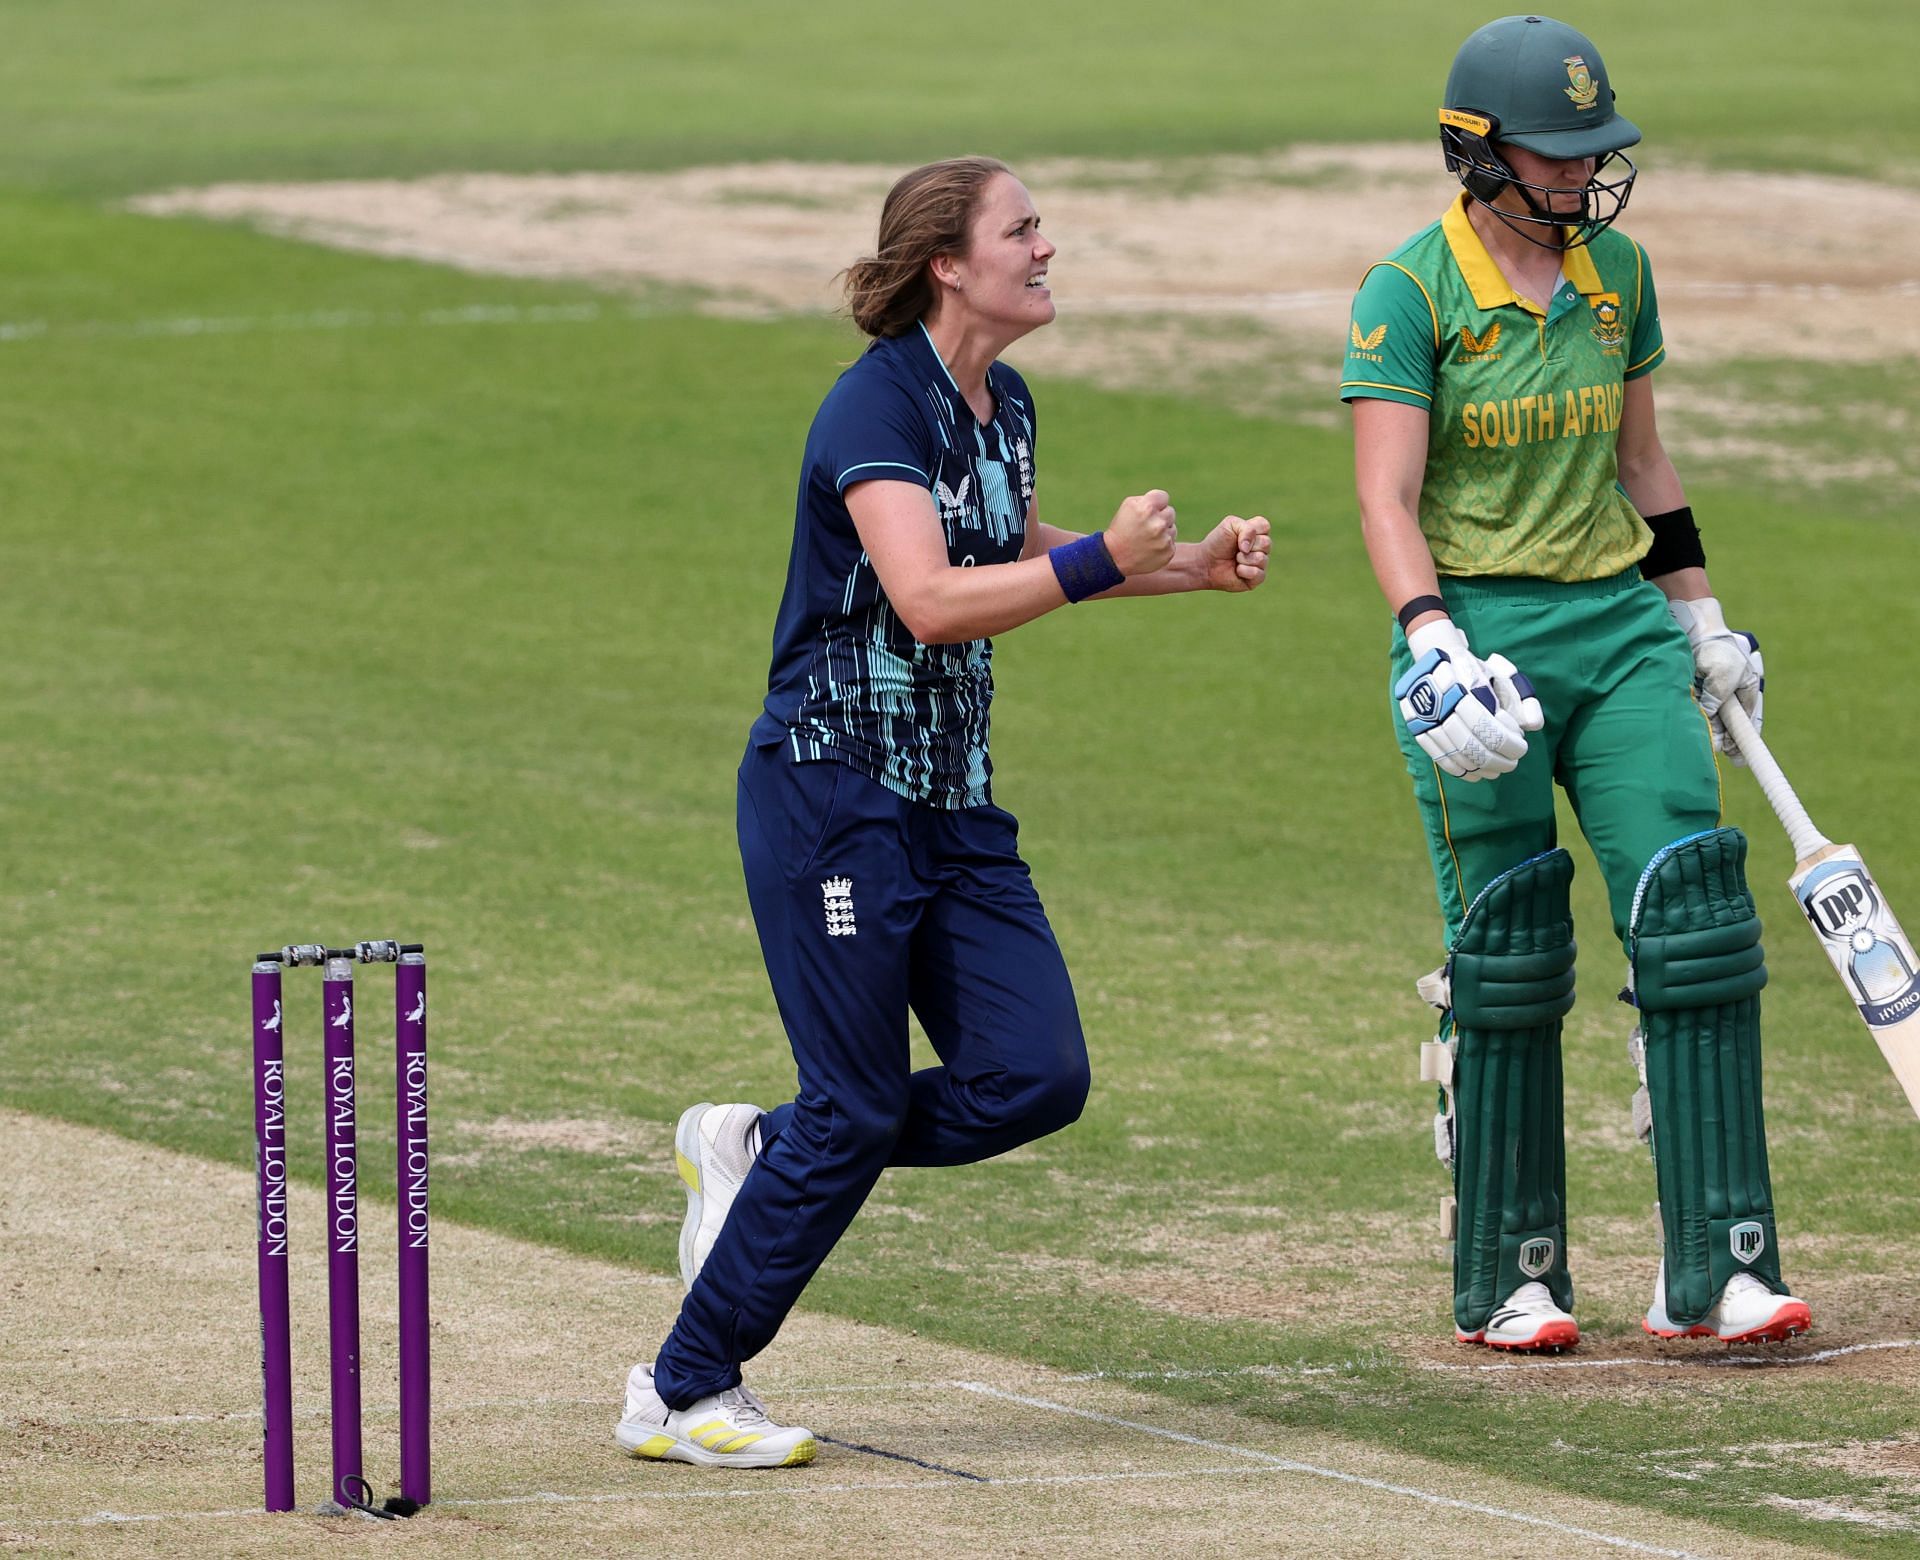 England Women v South Africa Women - 1st Royal London Series One Day International (Image Courtesy: Getty Images)